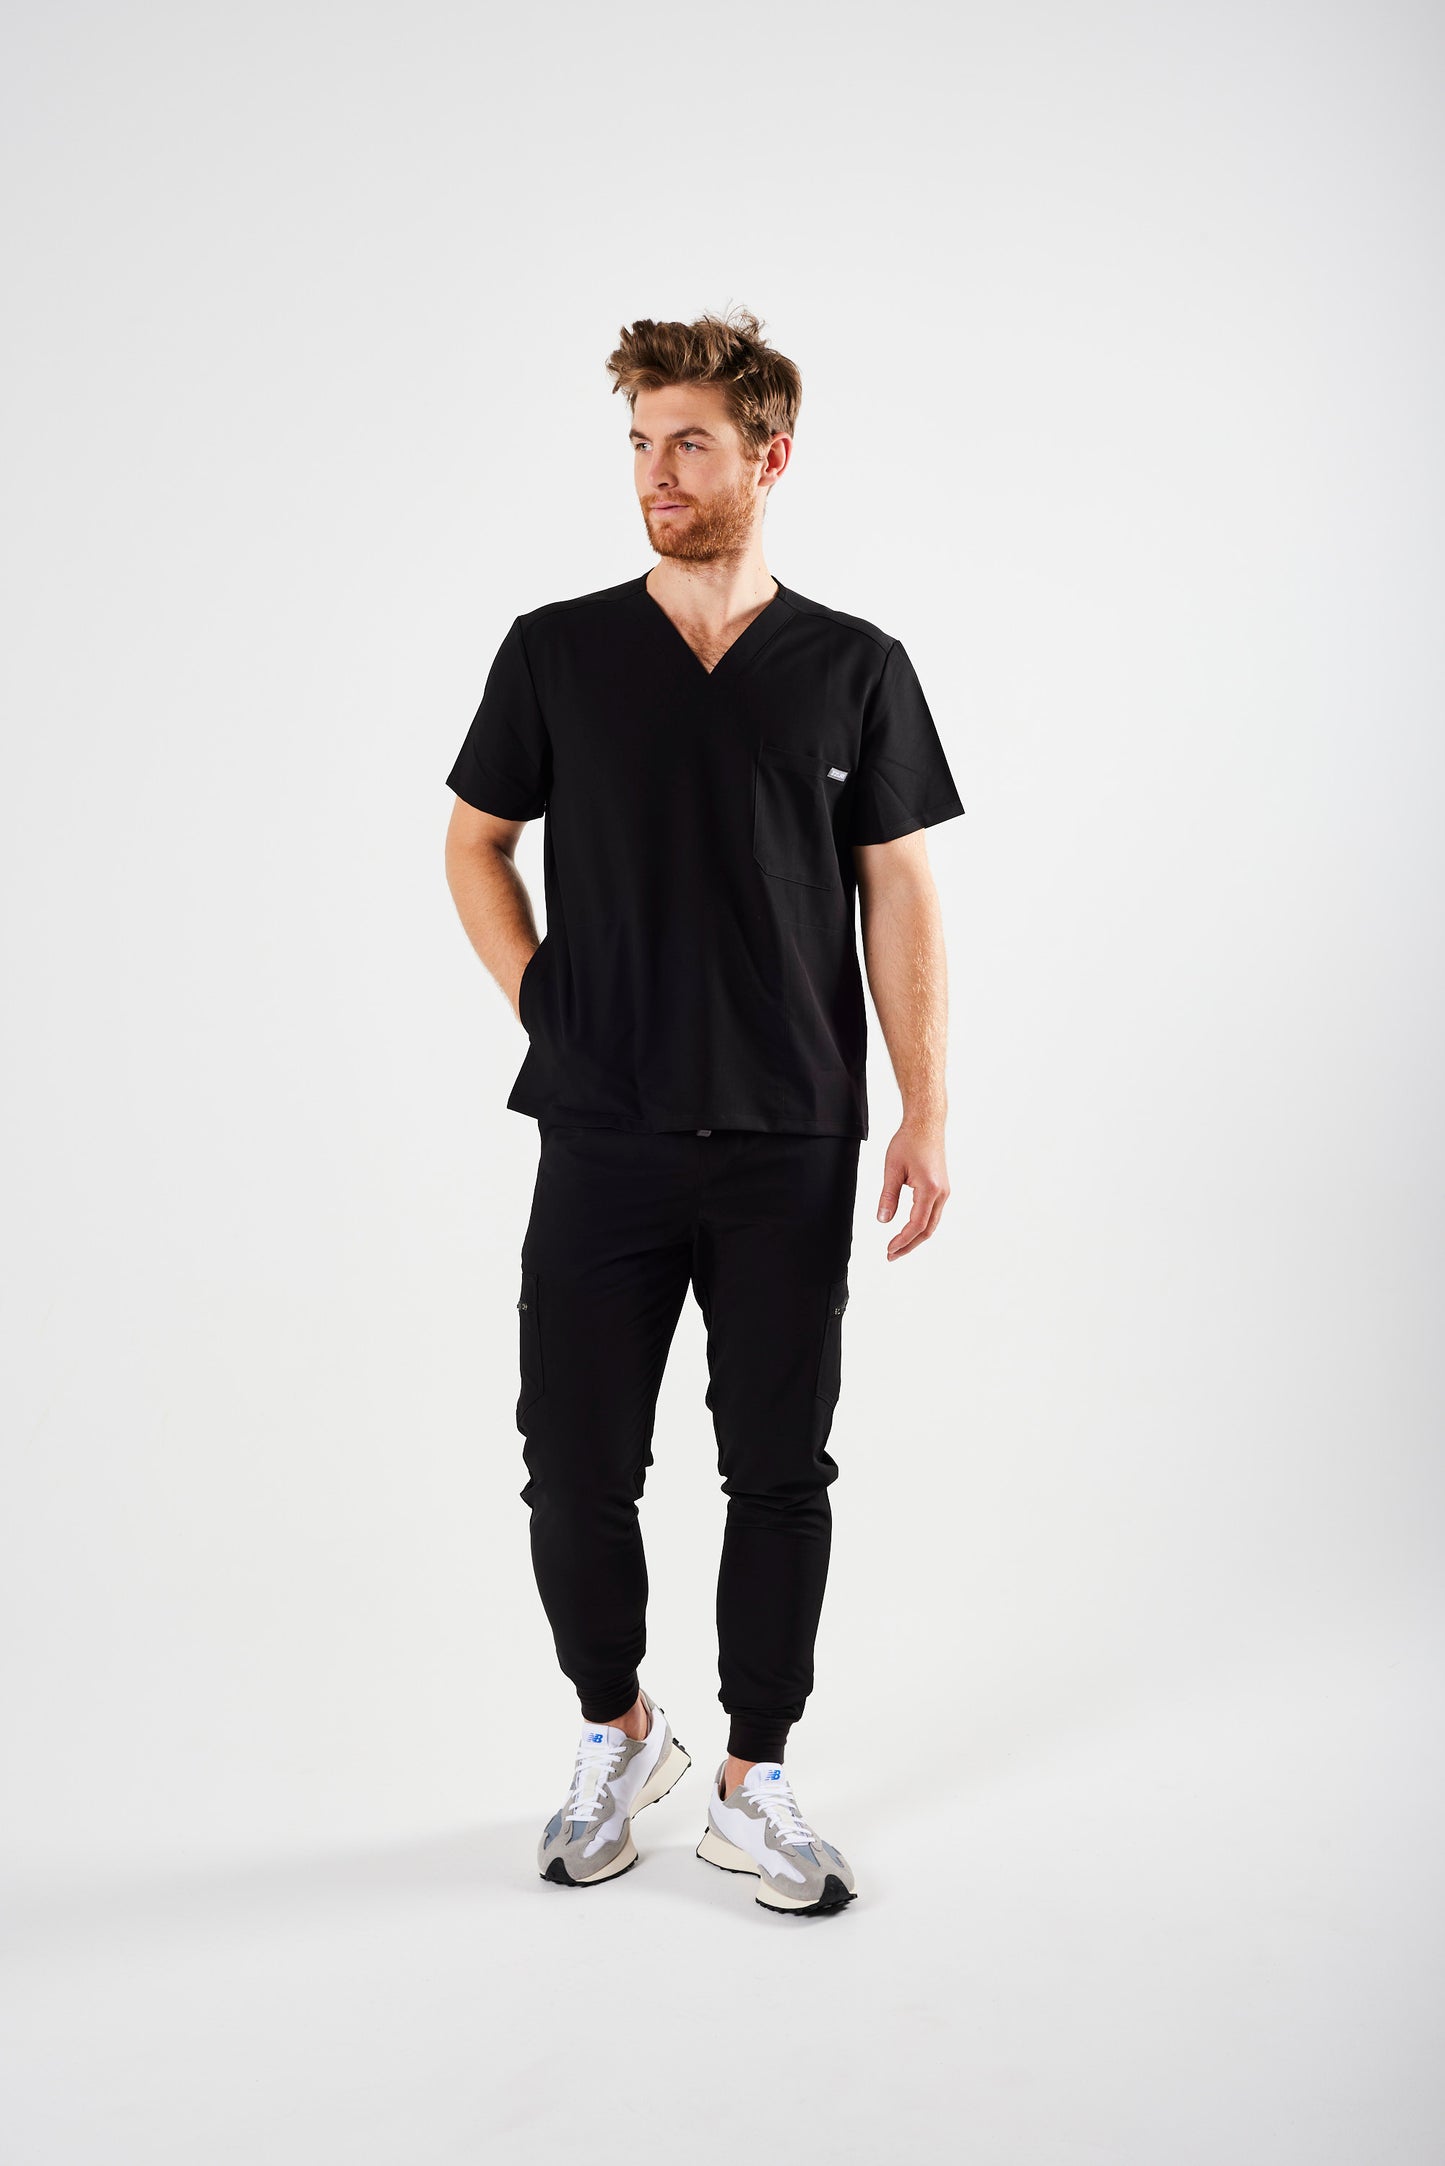 CLASSIC V-NECK WITH SIDE POCKETS MEN'S SCRUB TOP (BLACK) - NEW ARRIVALS